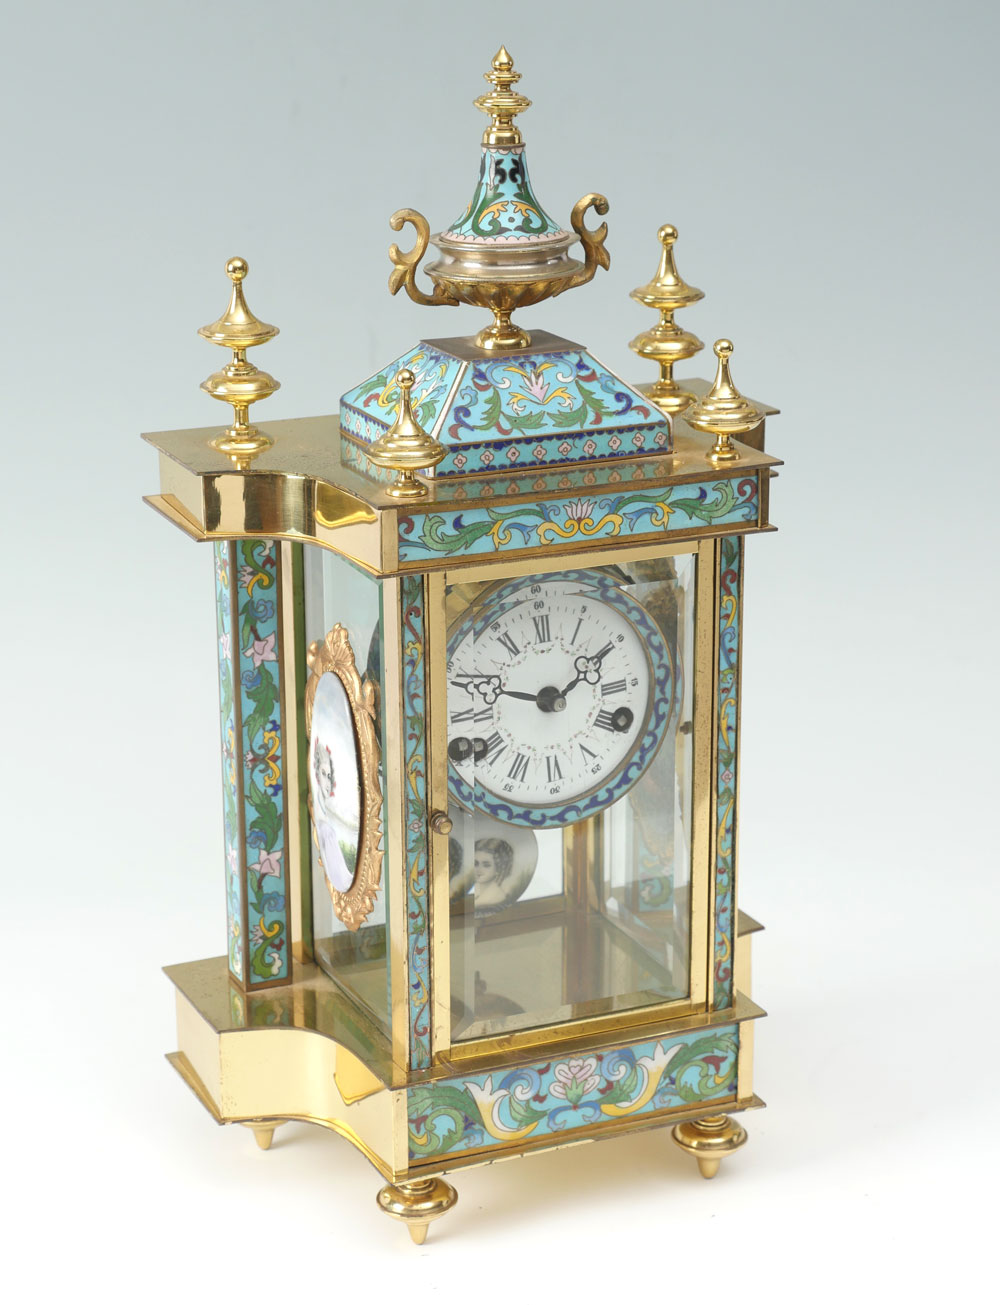 CHINESE CLOISONNE CLOCK WITH PORTRAITS: